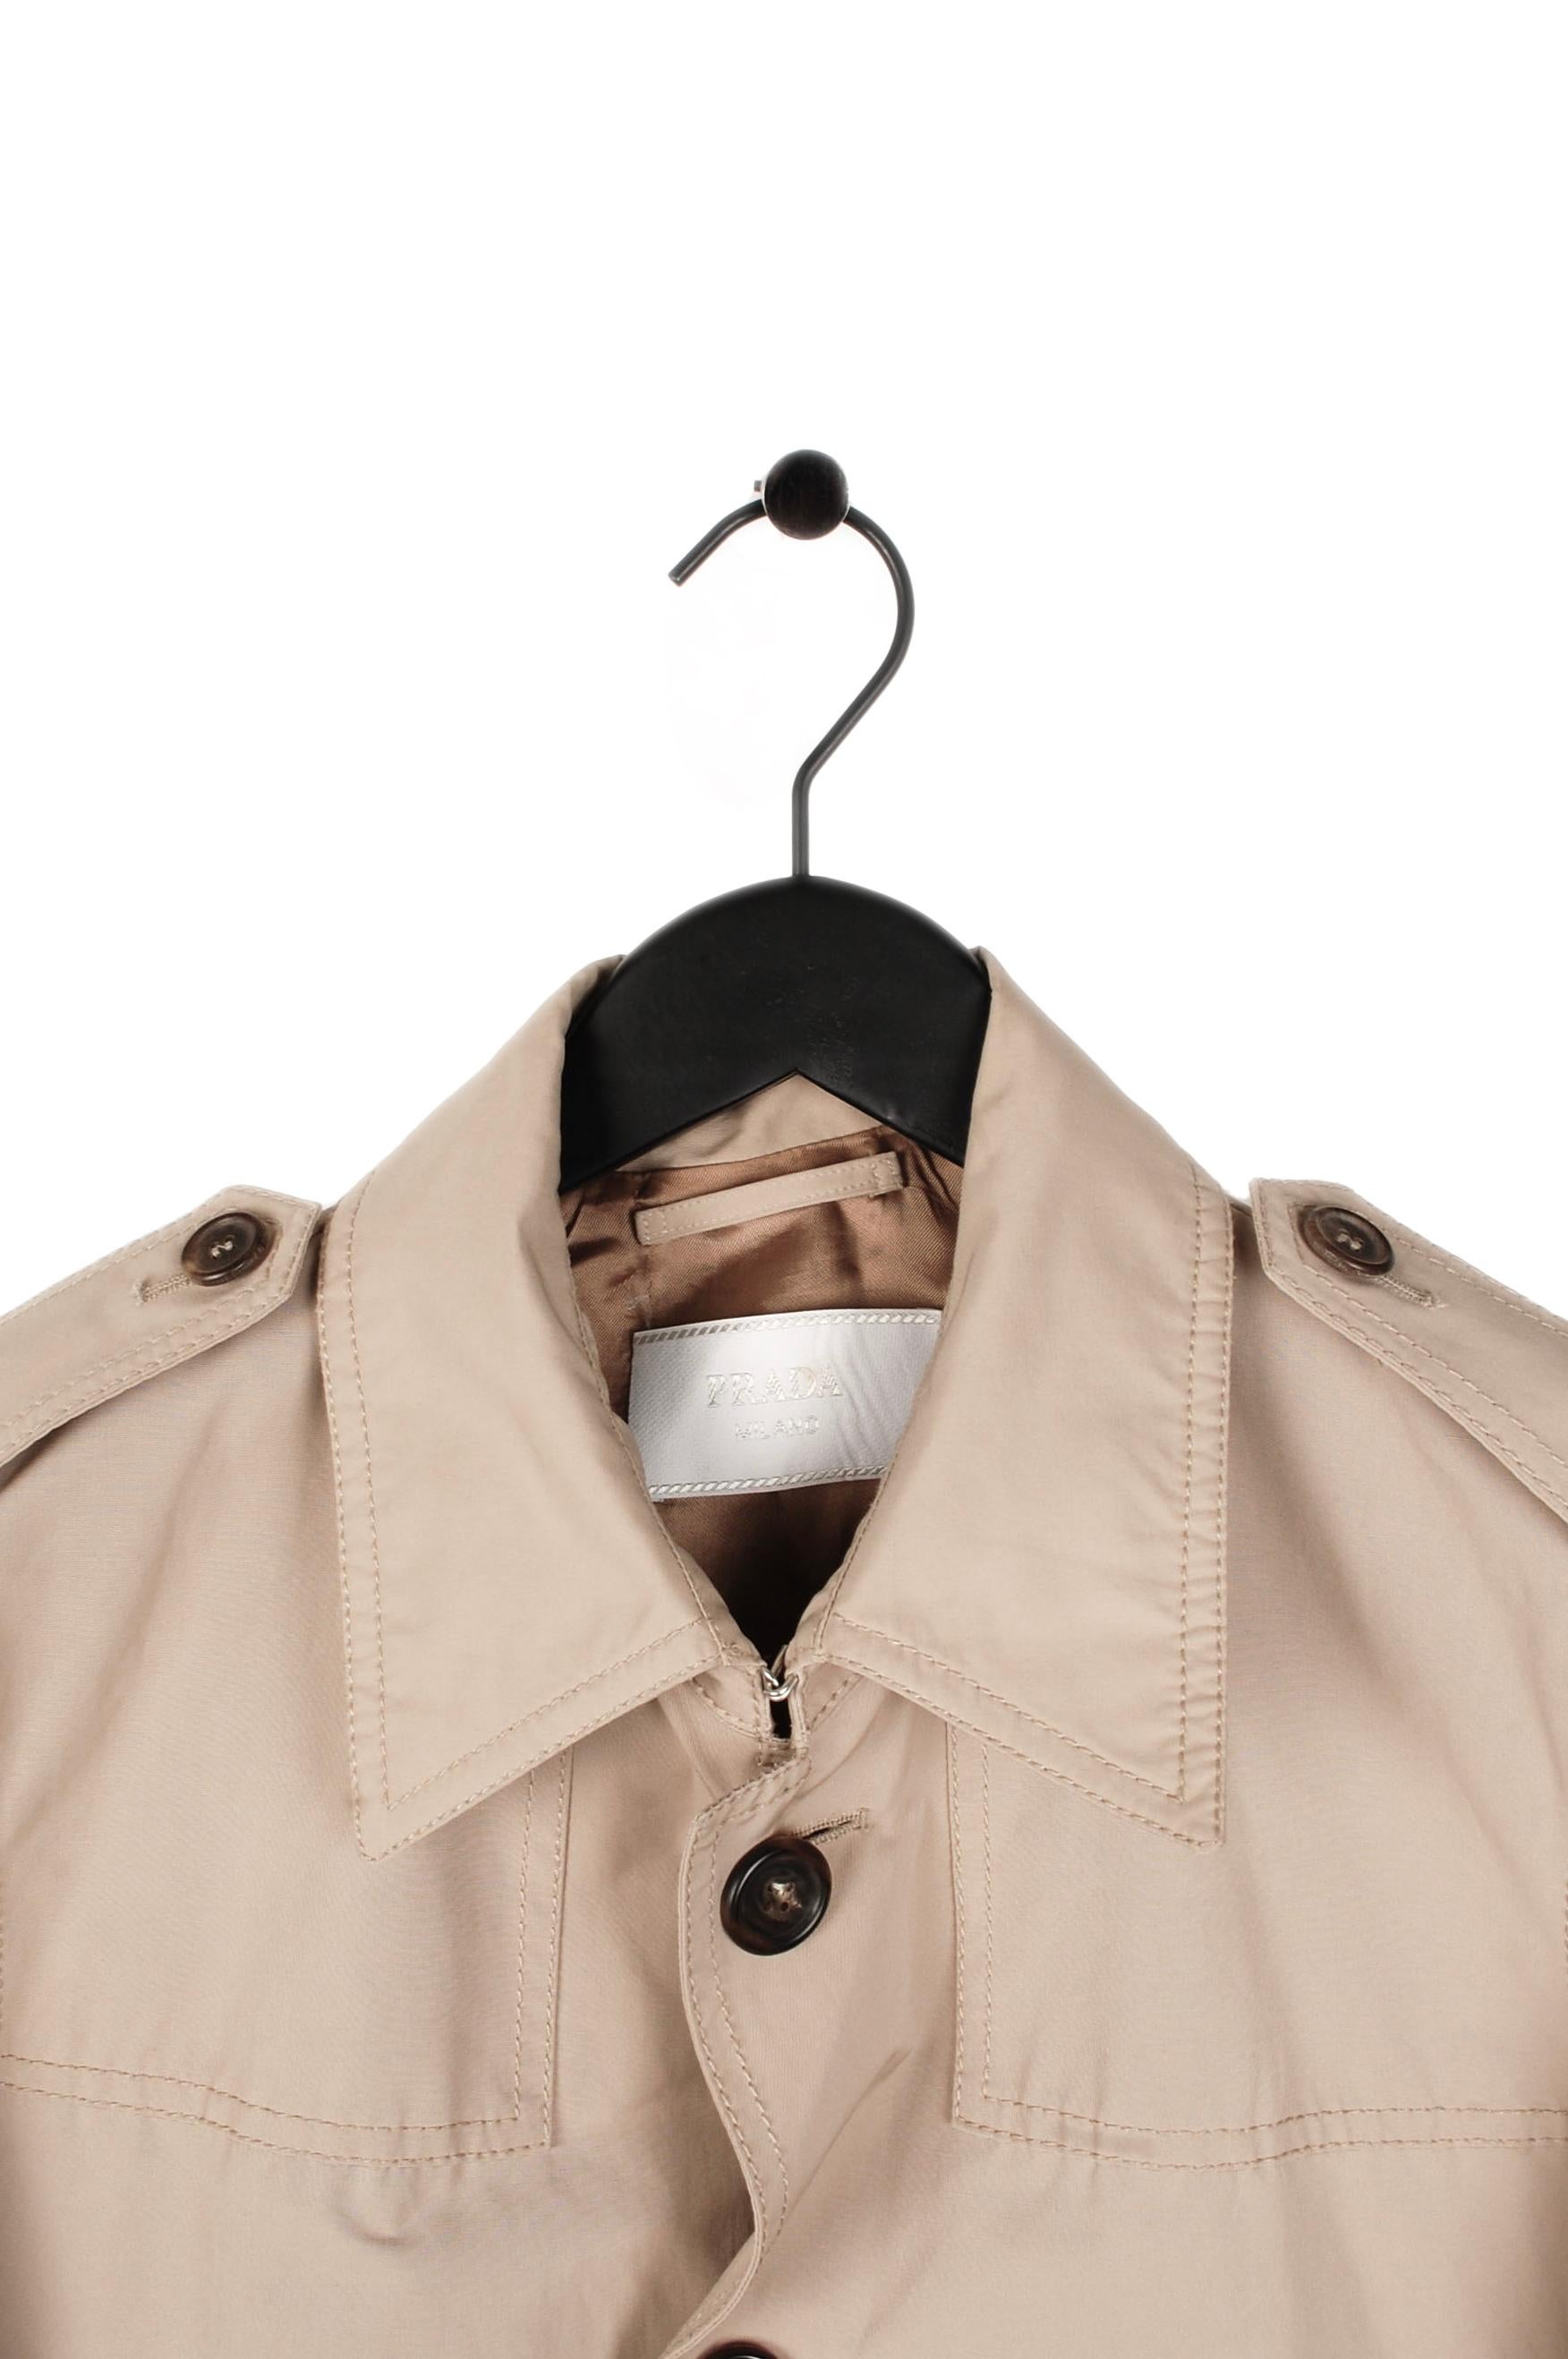 Item for sale is 100% genuine Prada Trench Belted Coat Belted (S037)
Color: Sand
(An actual color may a bit vary due to individual computer screen interpretation)
Material: 65% cotton, 35% silk
Tag size: 48IT(M) 
This coat is great quality item.